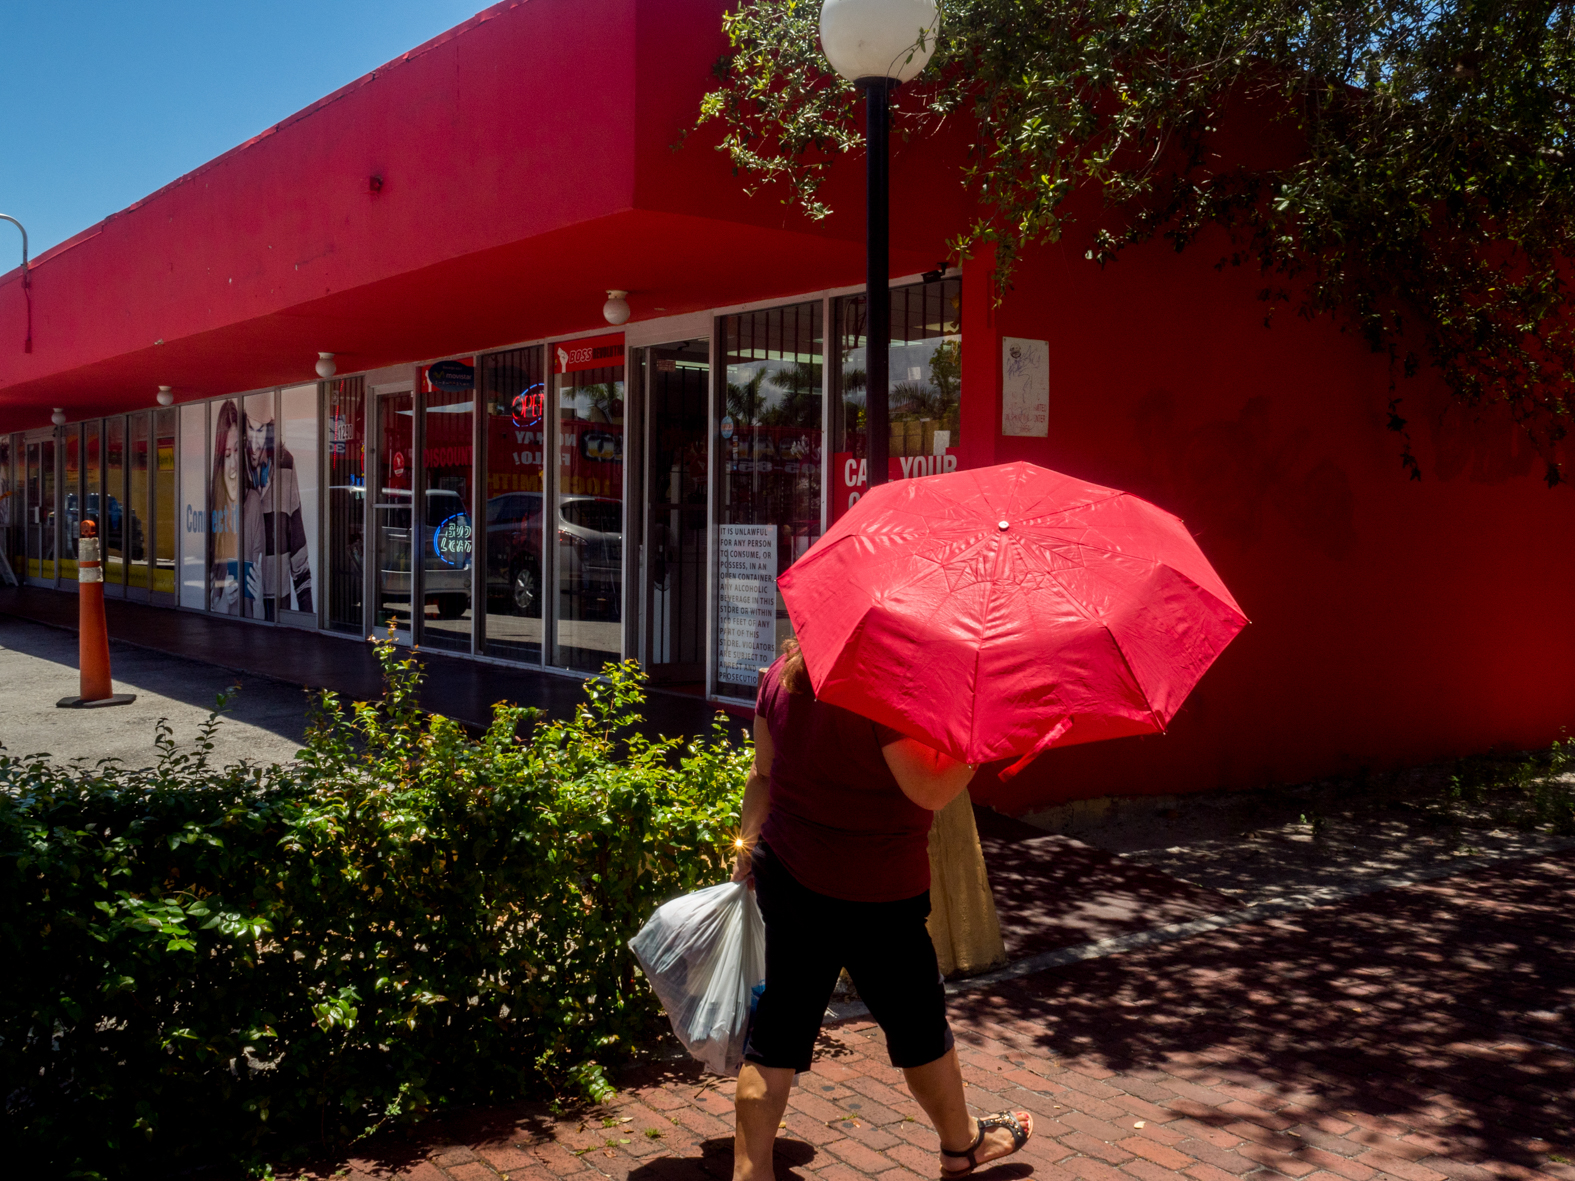 A woman with a red parasol walking through the Little Havana district of Miami.Miami is a seaport city on the Atlantic Ocean in south Florida. Miami's metro area is the eighth-most populous and fourth-largest urban area in the U.S., with a population of around 5.5 million.Miami is a major center, and a leader in finance, commerce, culture, media, entertainment, the arts, and international trade. In 2008, Forbes magazine ranked Miami {quote}America's Cleanest City{quote}, for its year-round good air quality, vast green spaces, clean drinking water, clean streets, and city-wide recycling programs. According to a 2009 UBS study of 73 world cities, Miami was ranked as the richest city in the United States, and the world's fifth-richest city in terms of purchasing power. Miami is nicknamed the {quote}Capital of Latin America{quote}, is the second largest U.S. city with a Spanish-speaking majority, and the largest city with a Cuban-American plurality.©Peter Dench/Getty Images Reportage